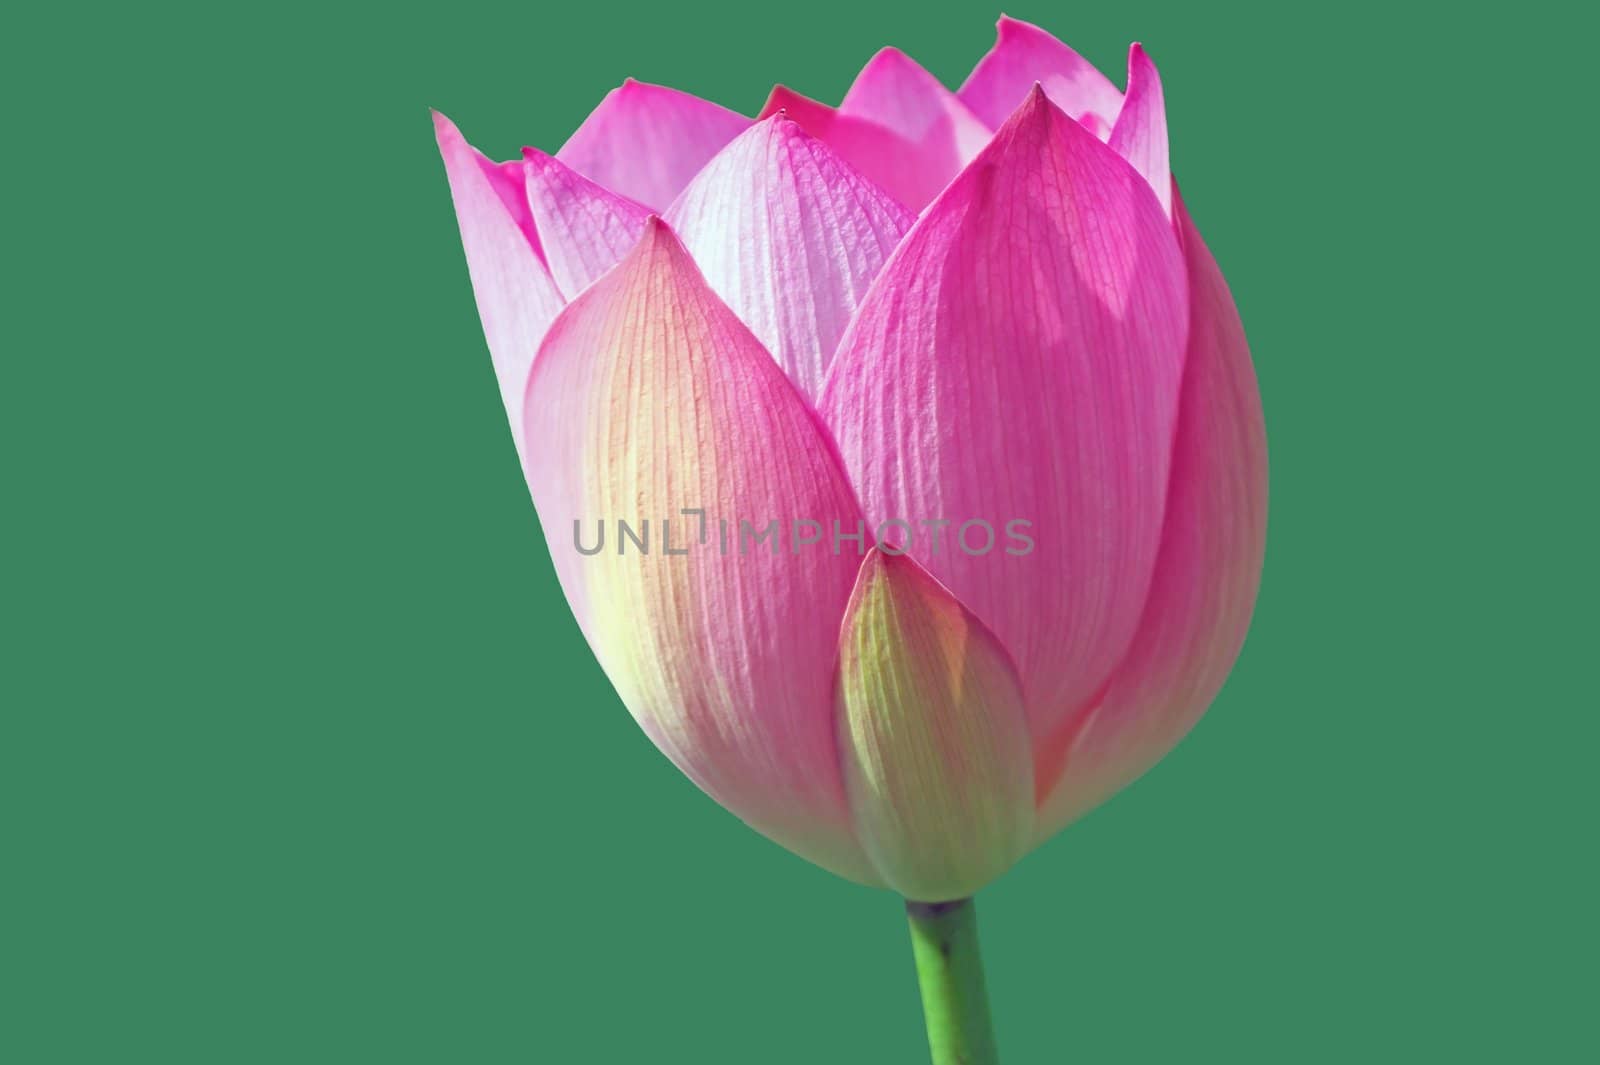 Lotus flower isolated on a green background Photo taken on: June, 2008